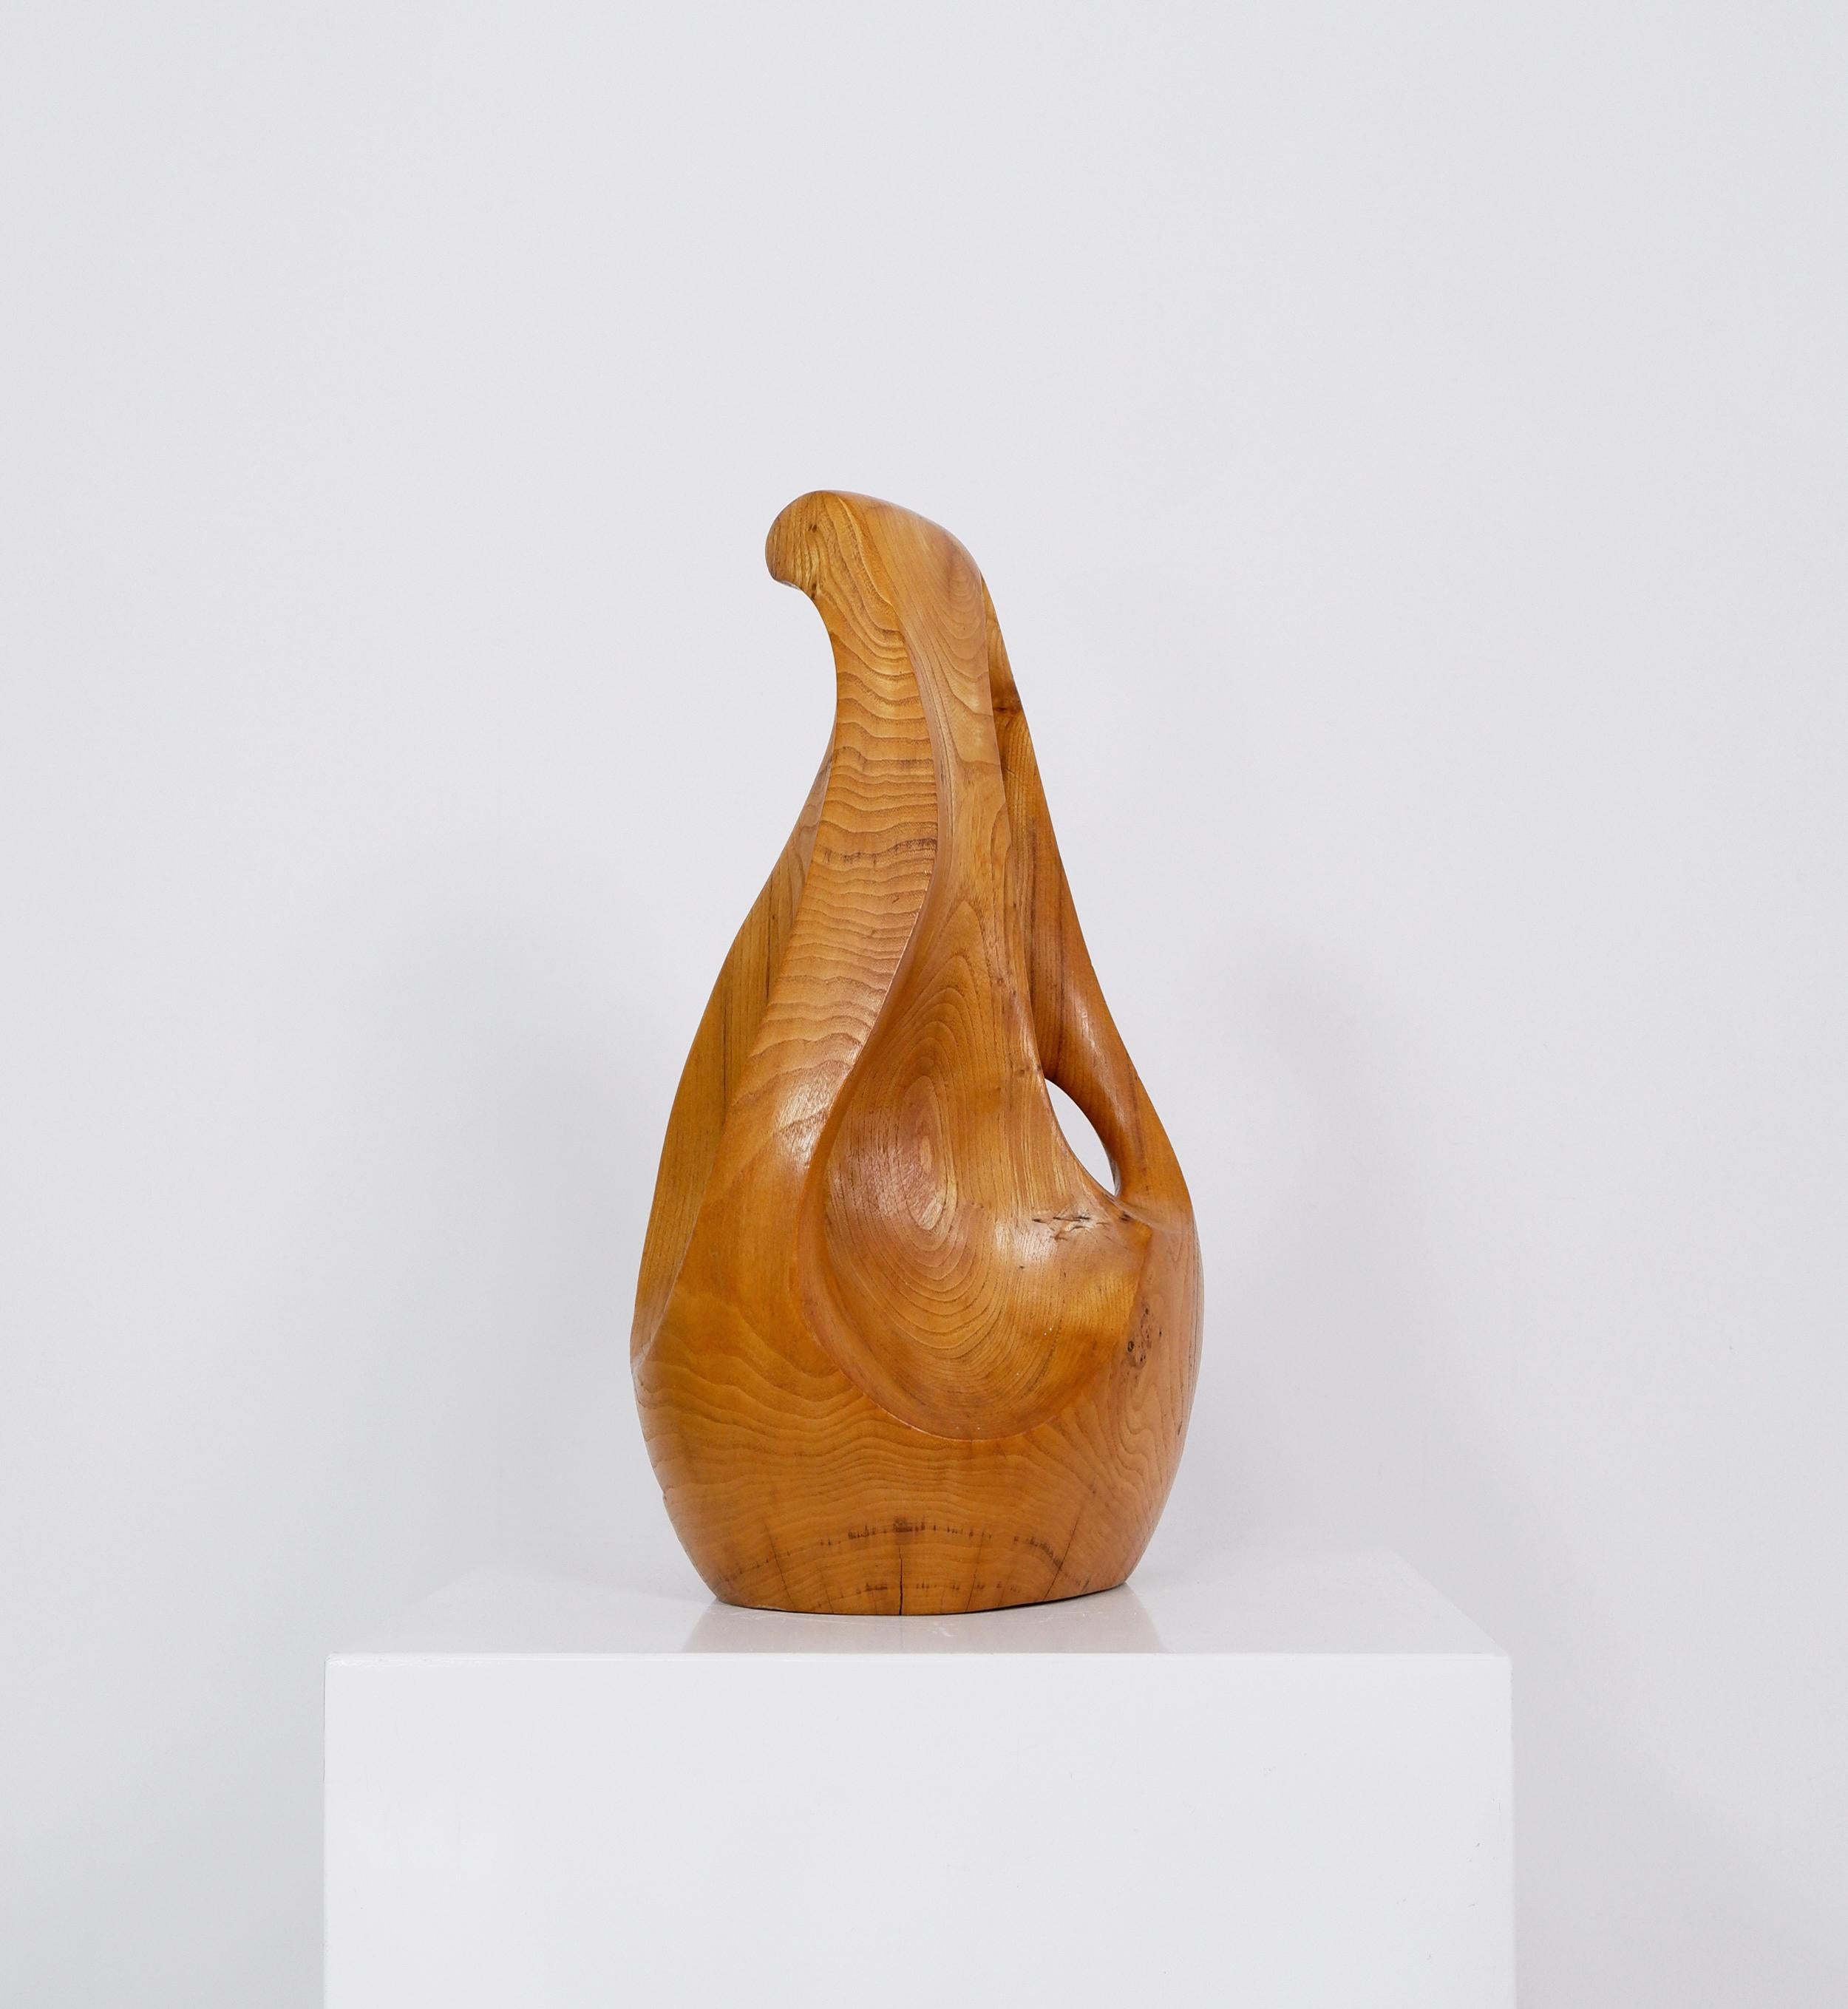 Large Wooden Abstract Sculpture, C.1970 In Good Condition For Sale In Surbiton, GB